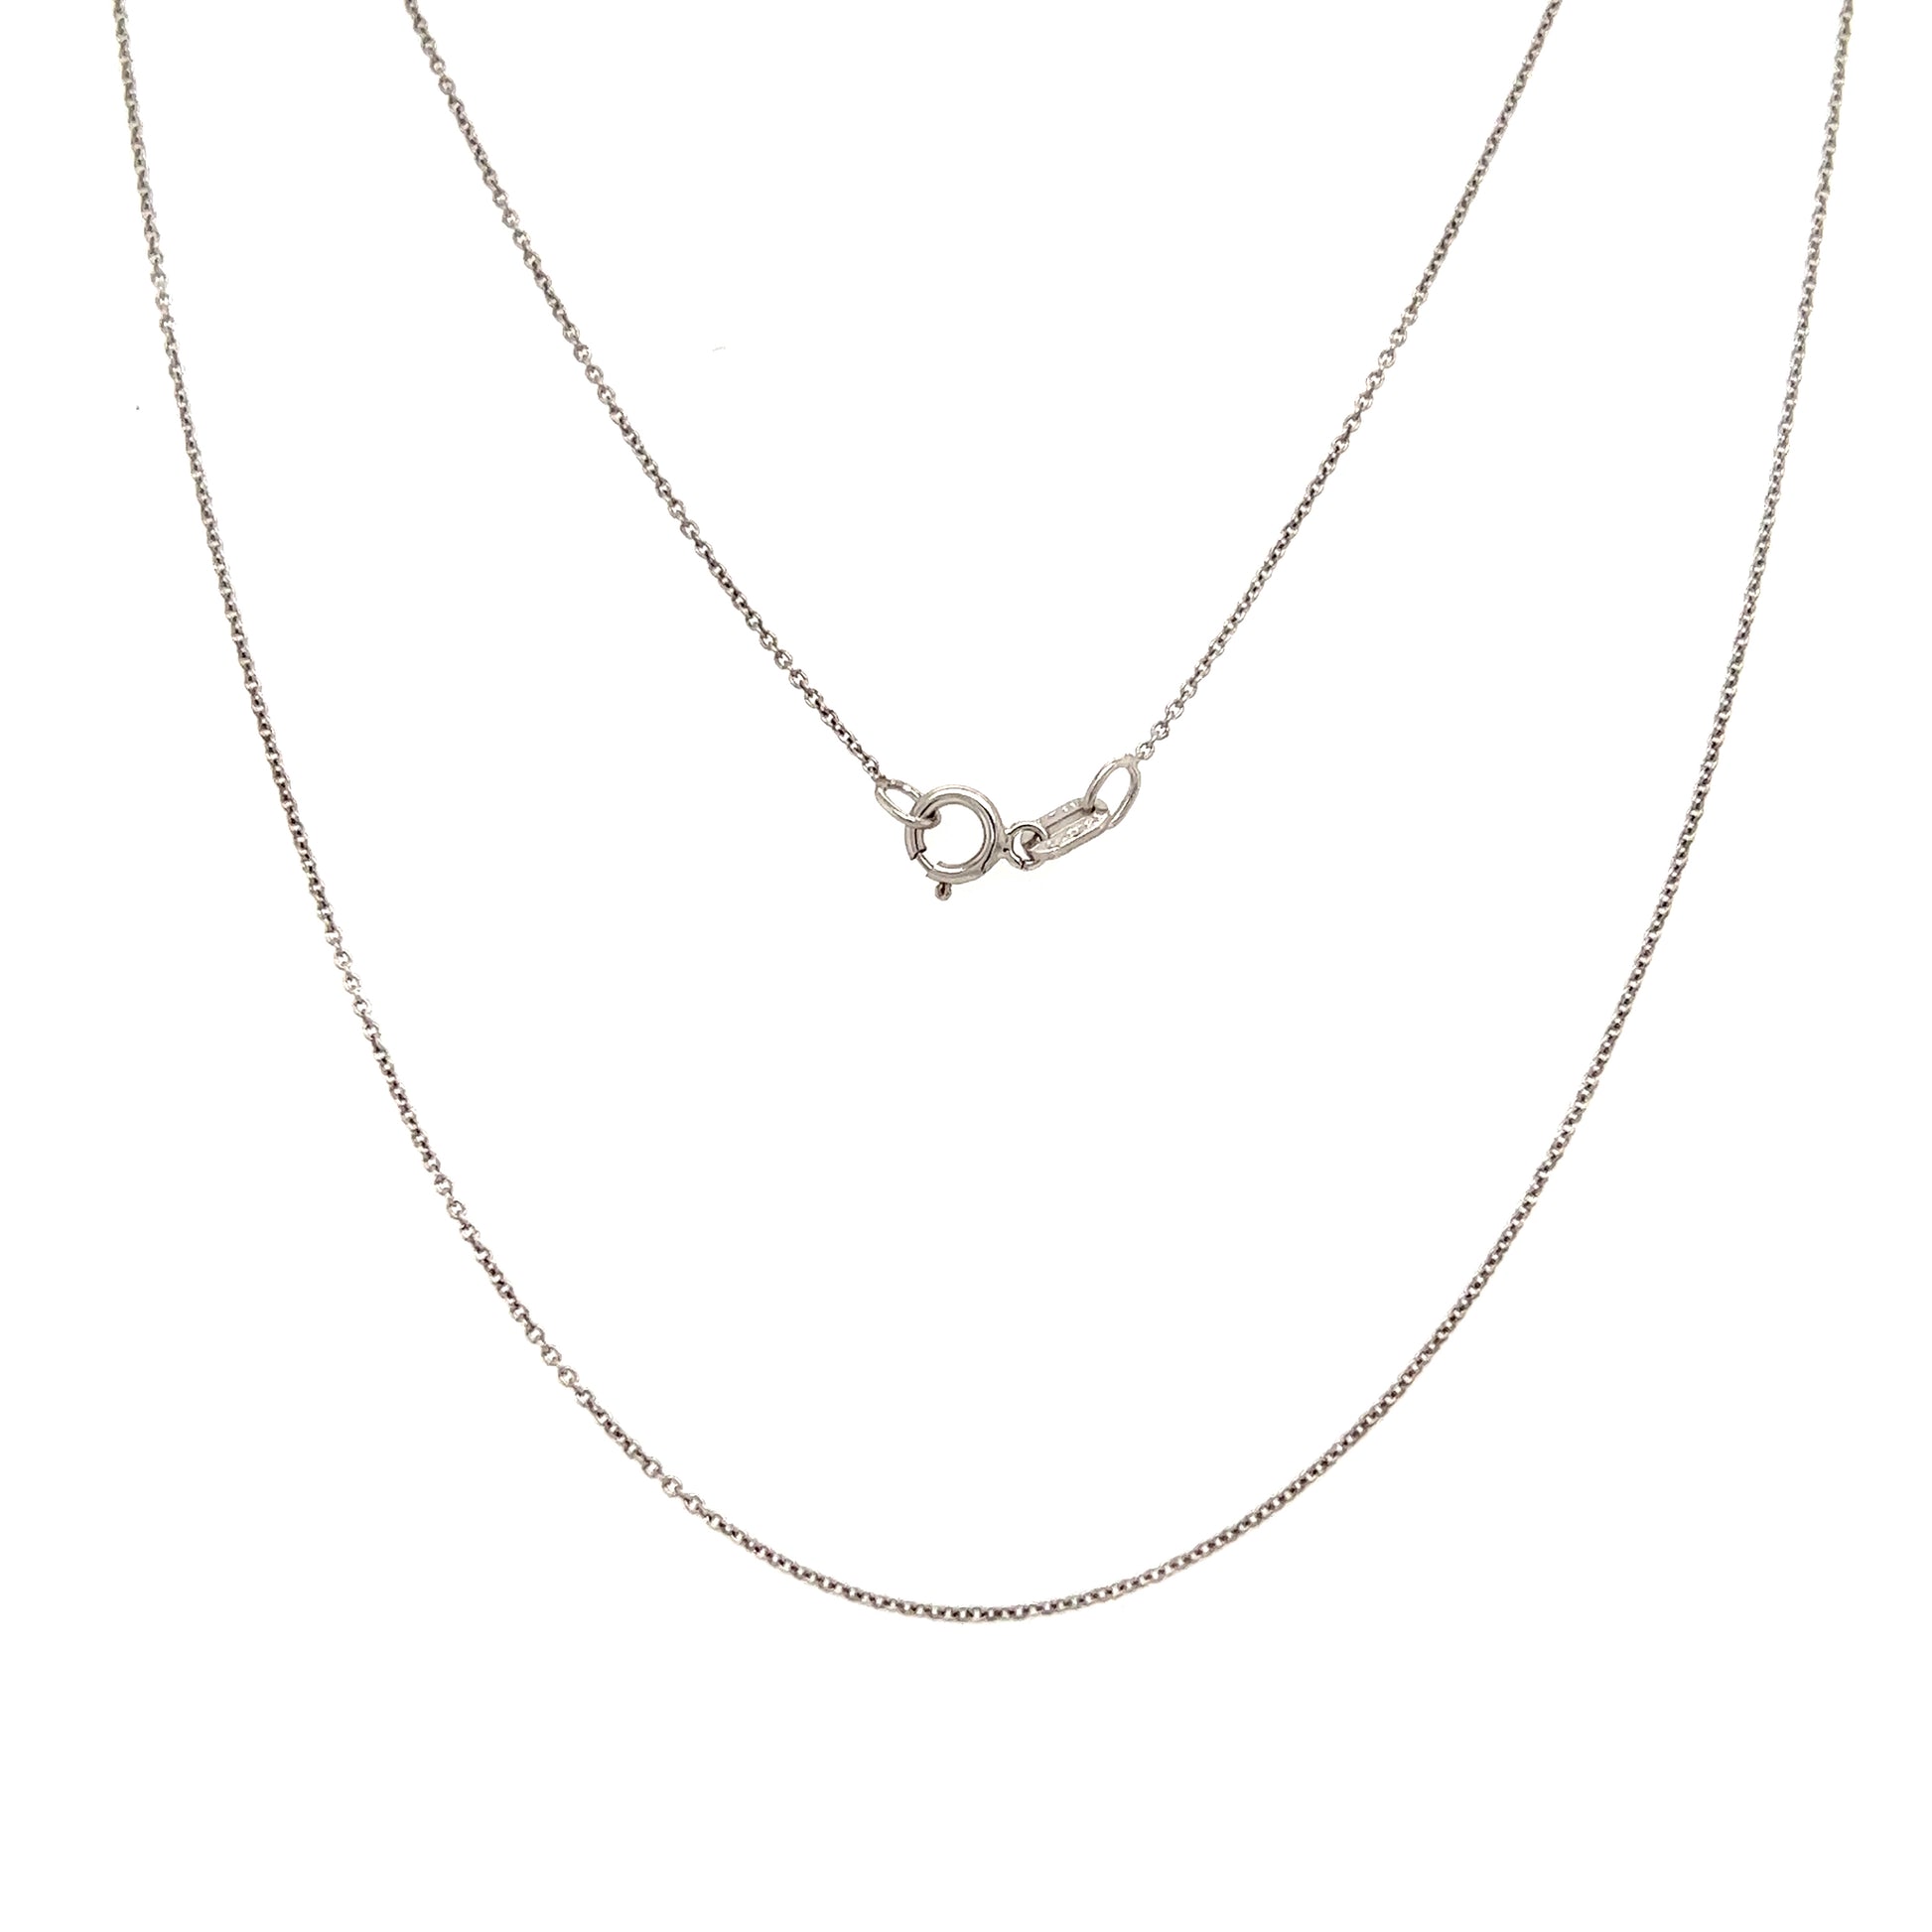 Cable 0.75mm Chain with 16in Length in 14K White Gold Full Chain View